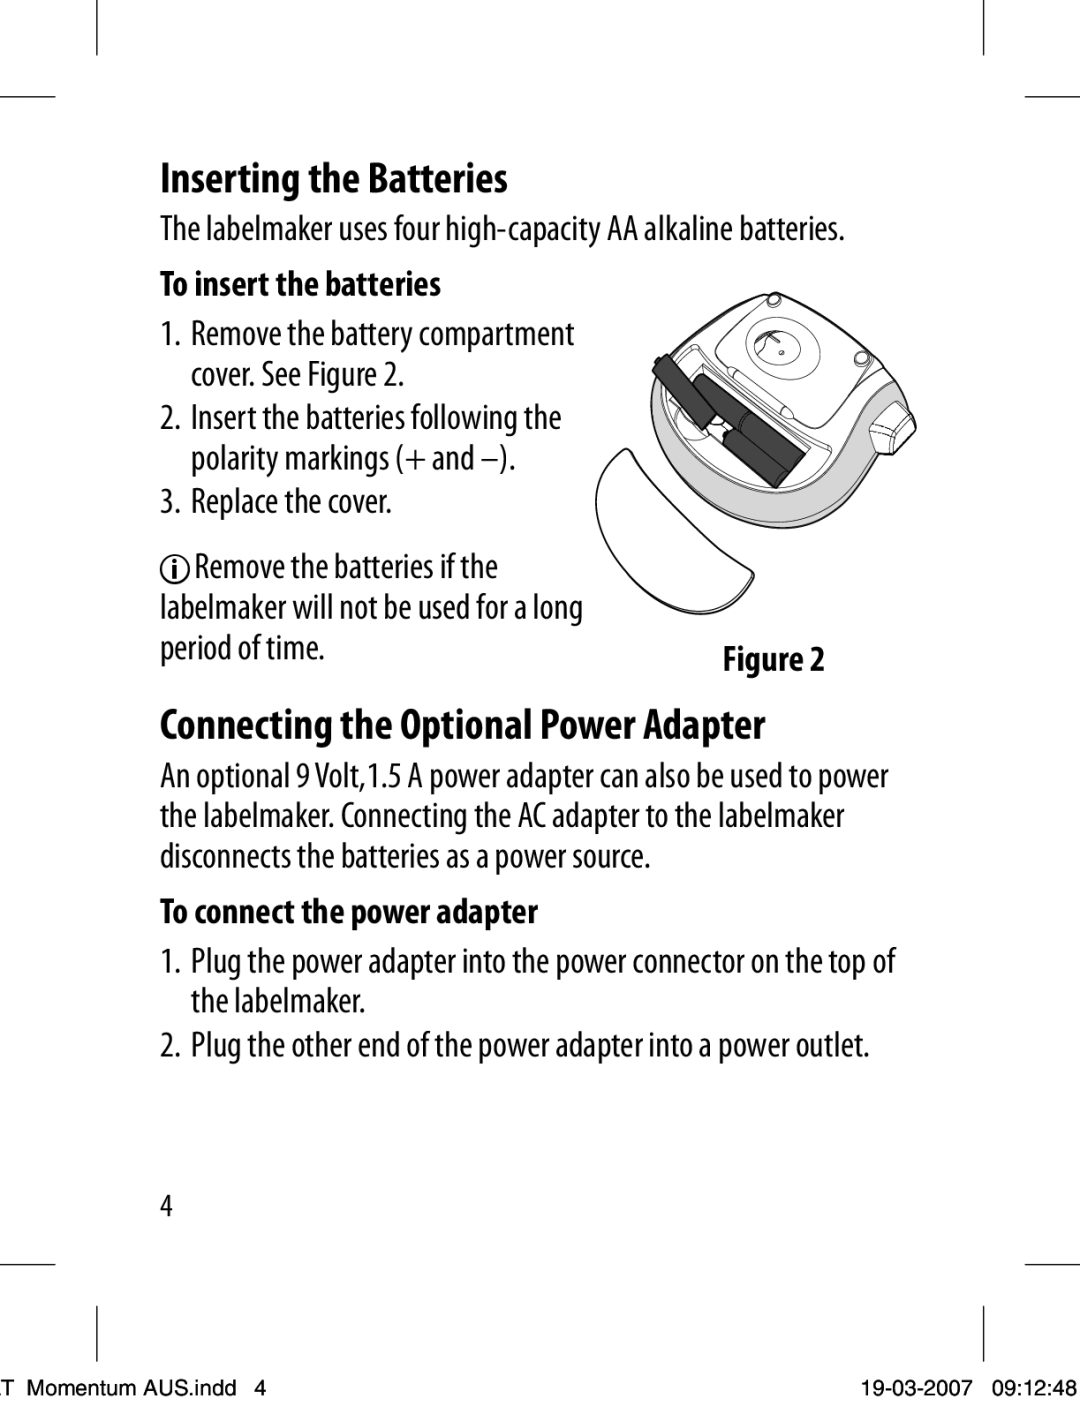 Dymo LT-100T manual Inserting the Batteries, Connecting the Optional Power Adapter, Replace the cover 